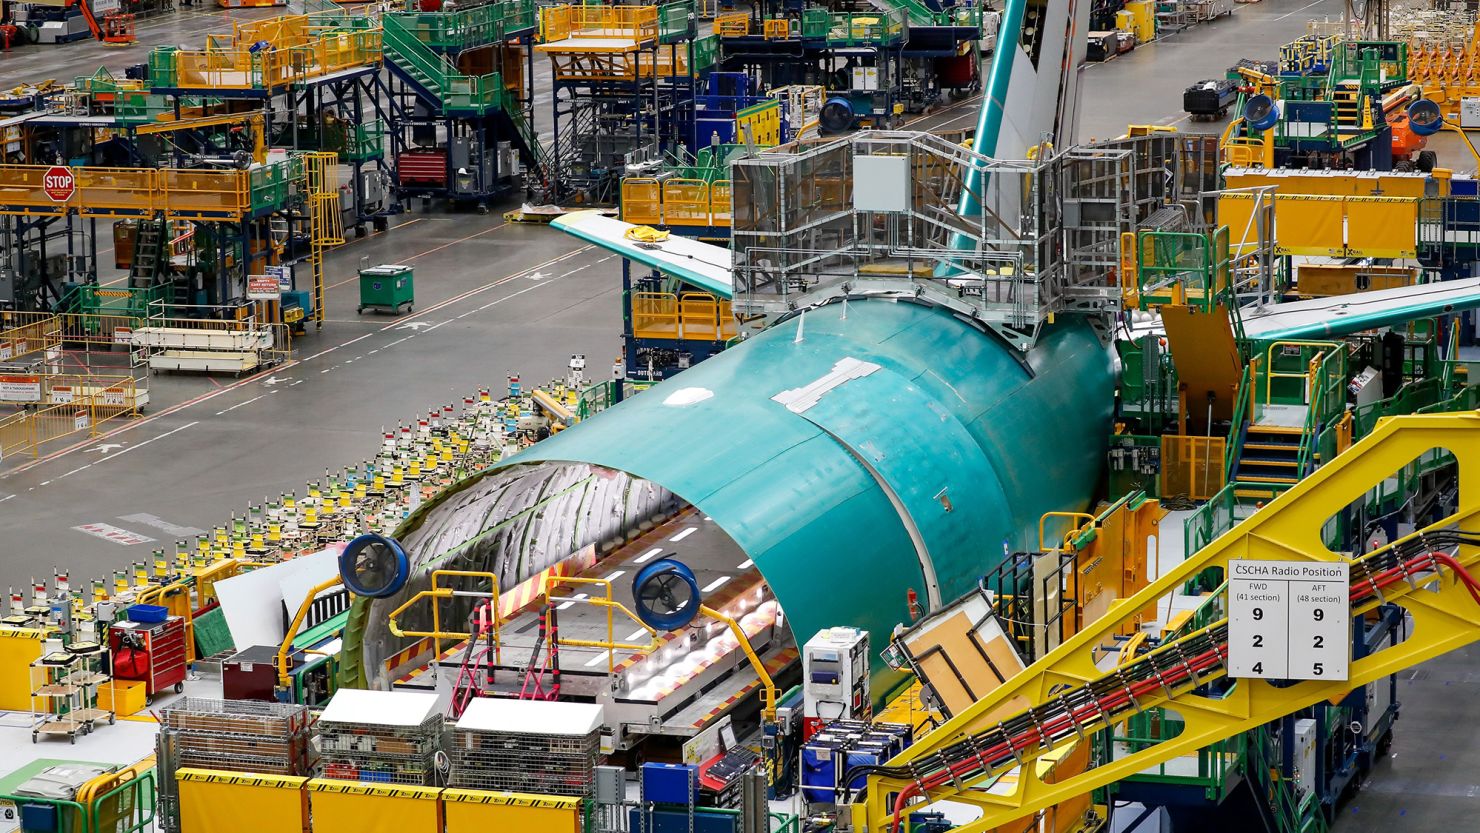 The rear fuselage section of a 777 freighter is seen at Boeing's Everett, Washington, factory in this 2022 file photo.